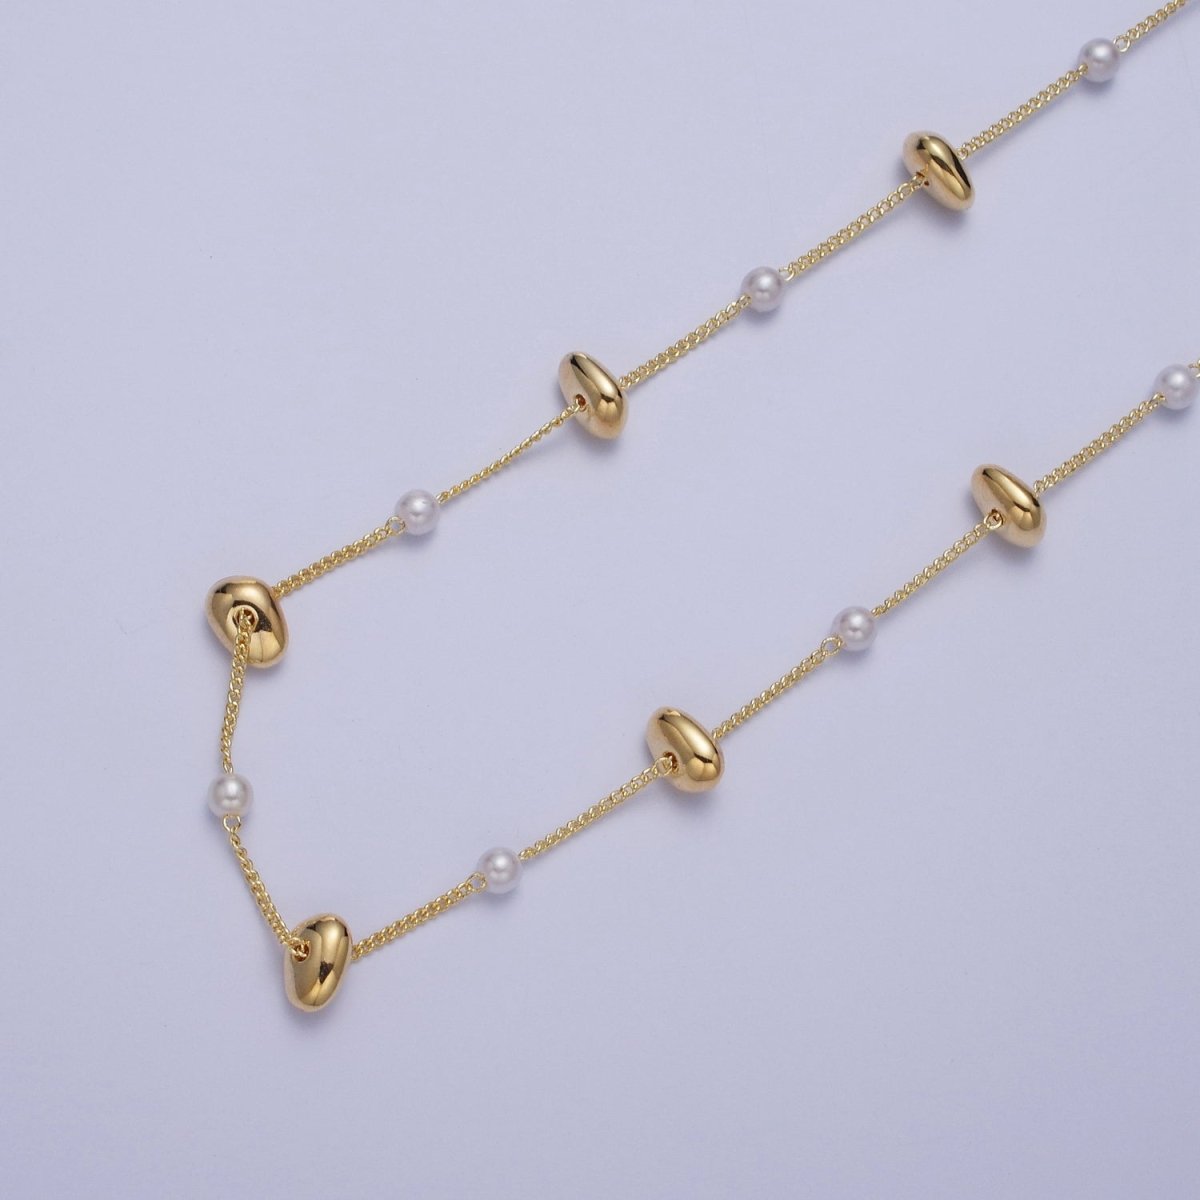 Gold Satellite Pearl & Thin Geometric Bead Chain Wholesale by Yard For DIY Jewelry Making Component | ROLL-834 Clearance Pricing - DLUXCA